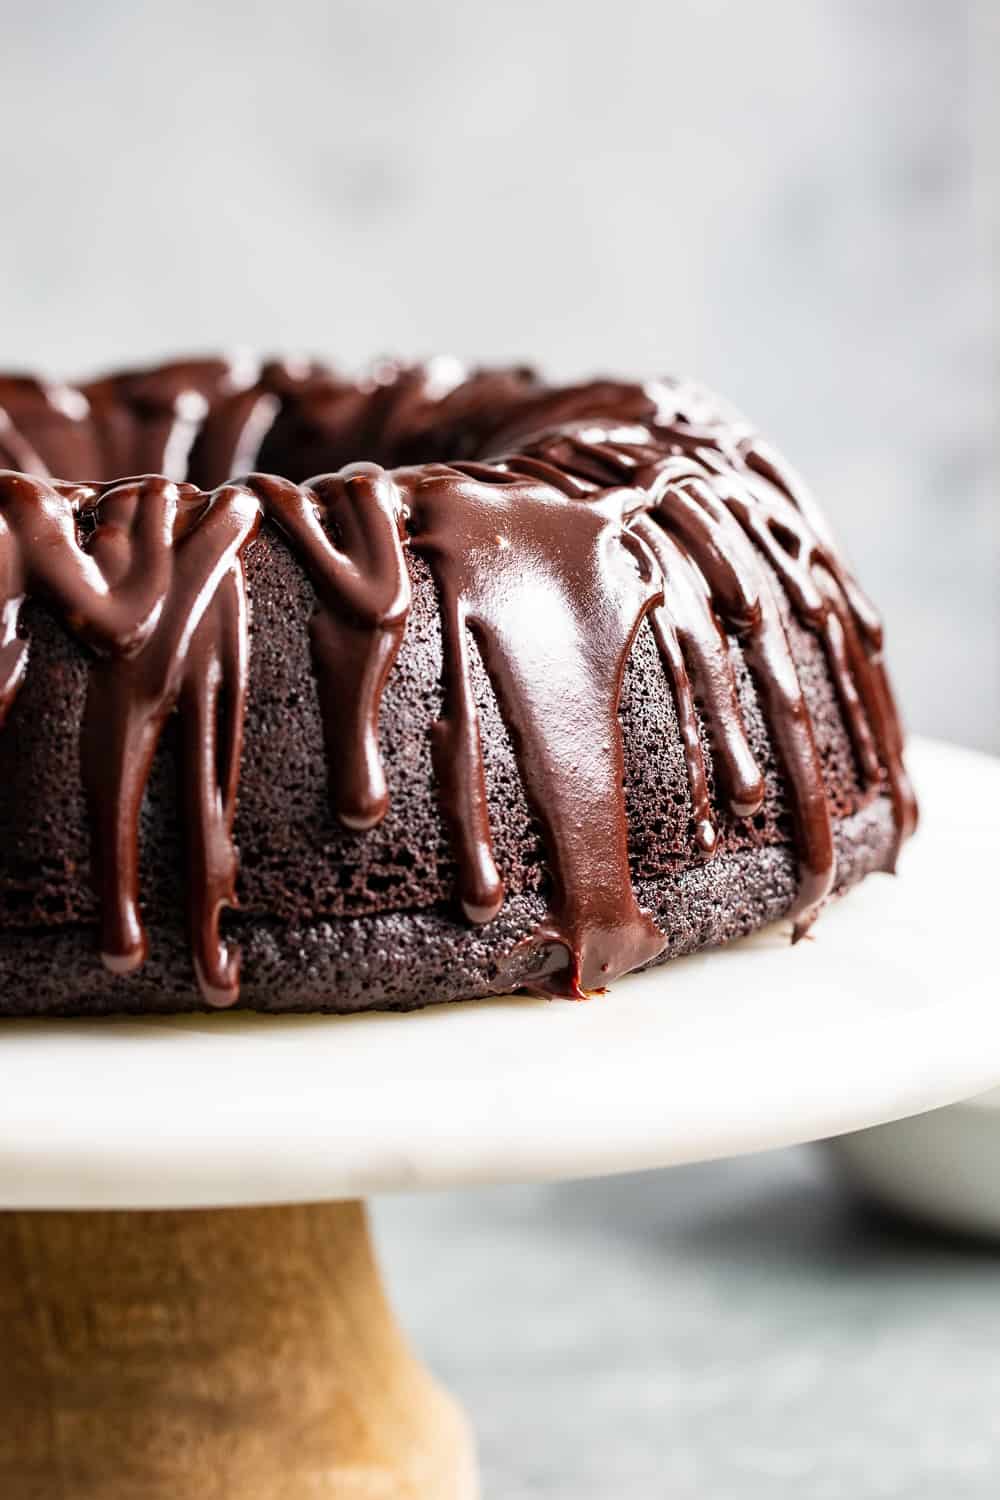 This ultra rich paleo chocolate bundt cake is easier than expected and perfect for any special occasion. A grain free, gluten free and dairy free perfectly moist chocolate cake is topped with an easy dairy free chocolate ganache. Win over any chocolate lover with the first bite! #paleo #grainfree #cleaneating #glutenfree 